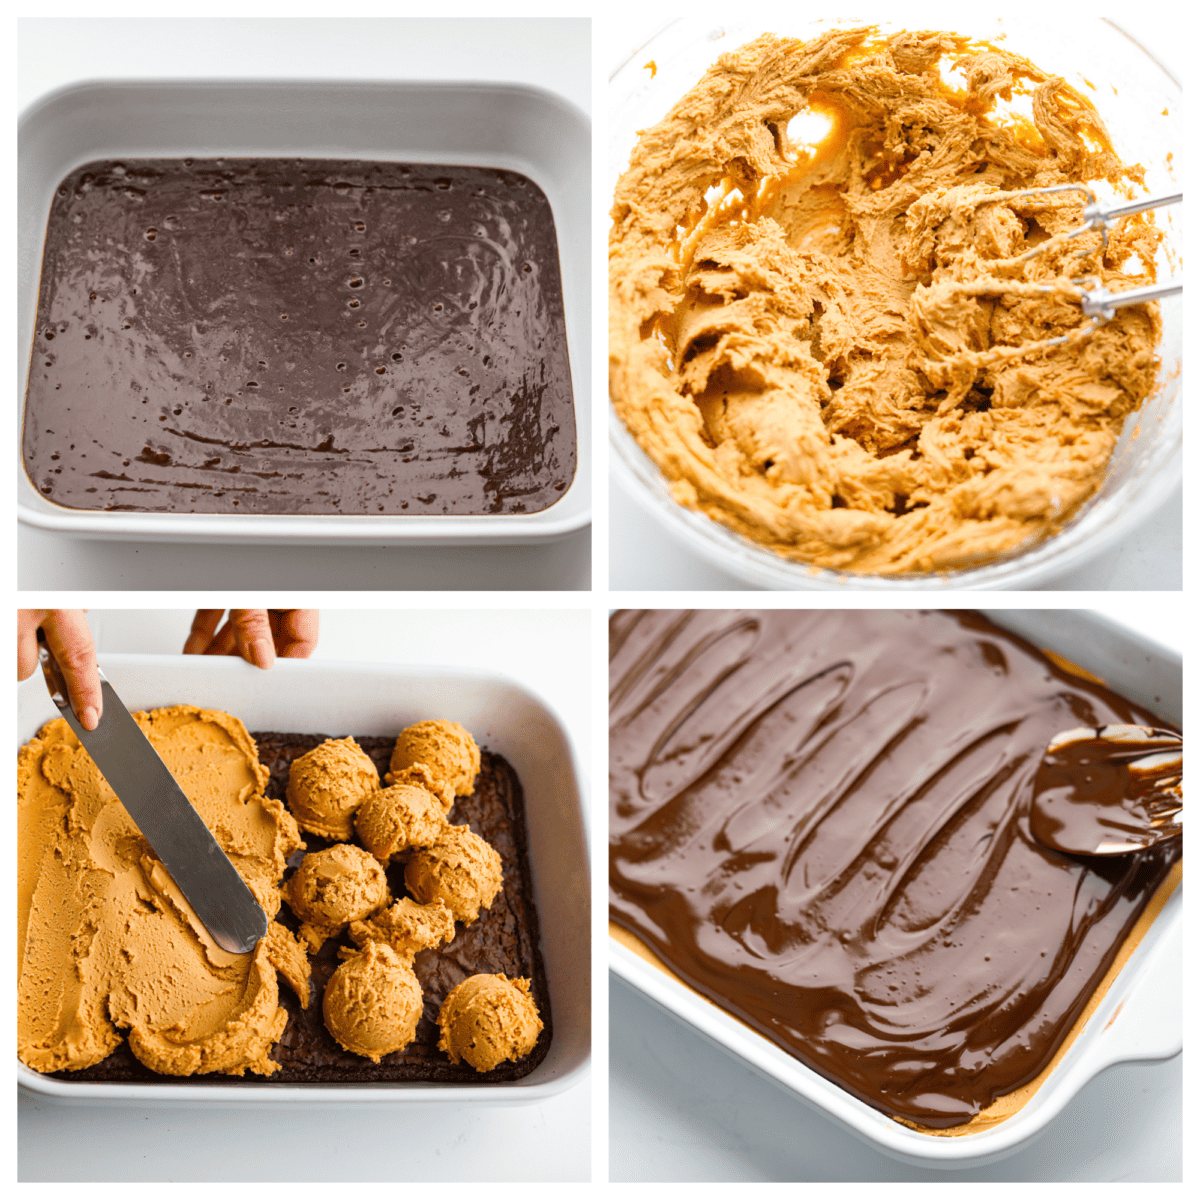 First photo of the brownie batter in the pan. Second photo of the peanut butter layer mixed in a bowl. Third photo of the peanut butter later spreading on the brownies. Fourth photo of the ganache spreading on the brownies.